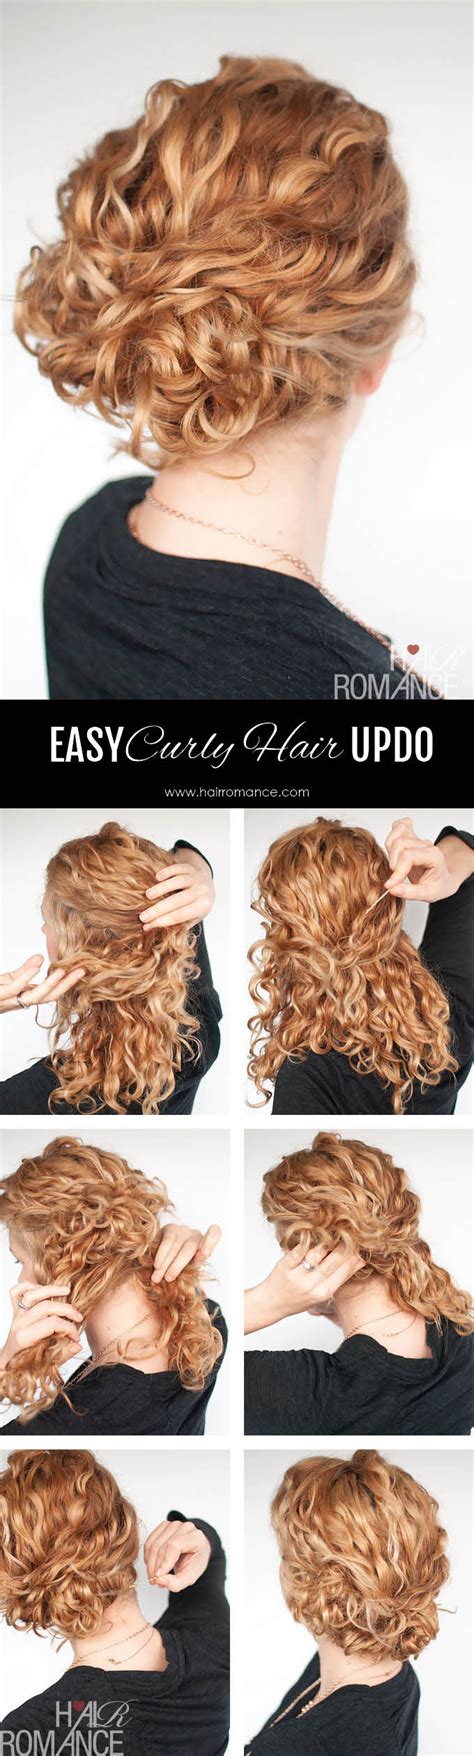  79 Stylish And Chic Easy Updos For Curly Hair Hairstyles Inspiration